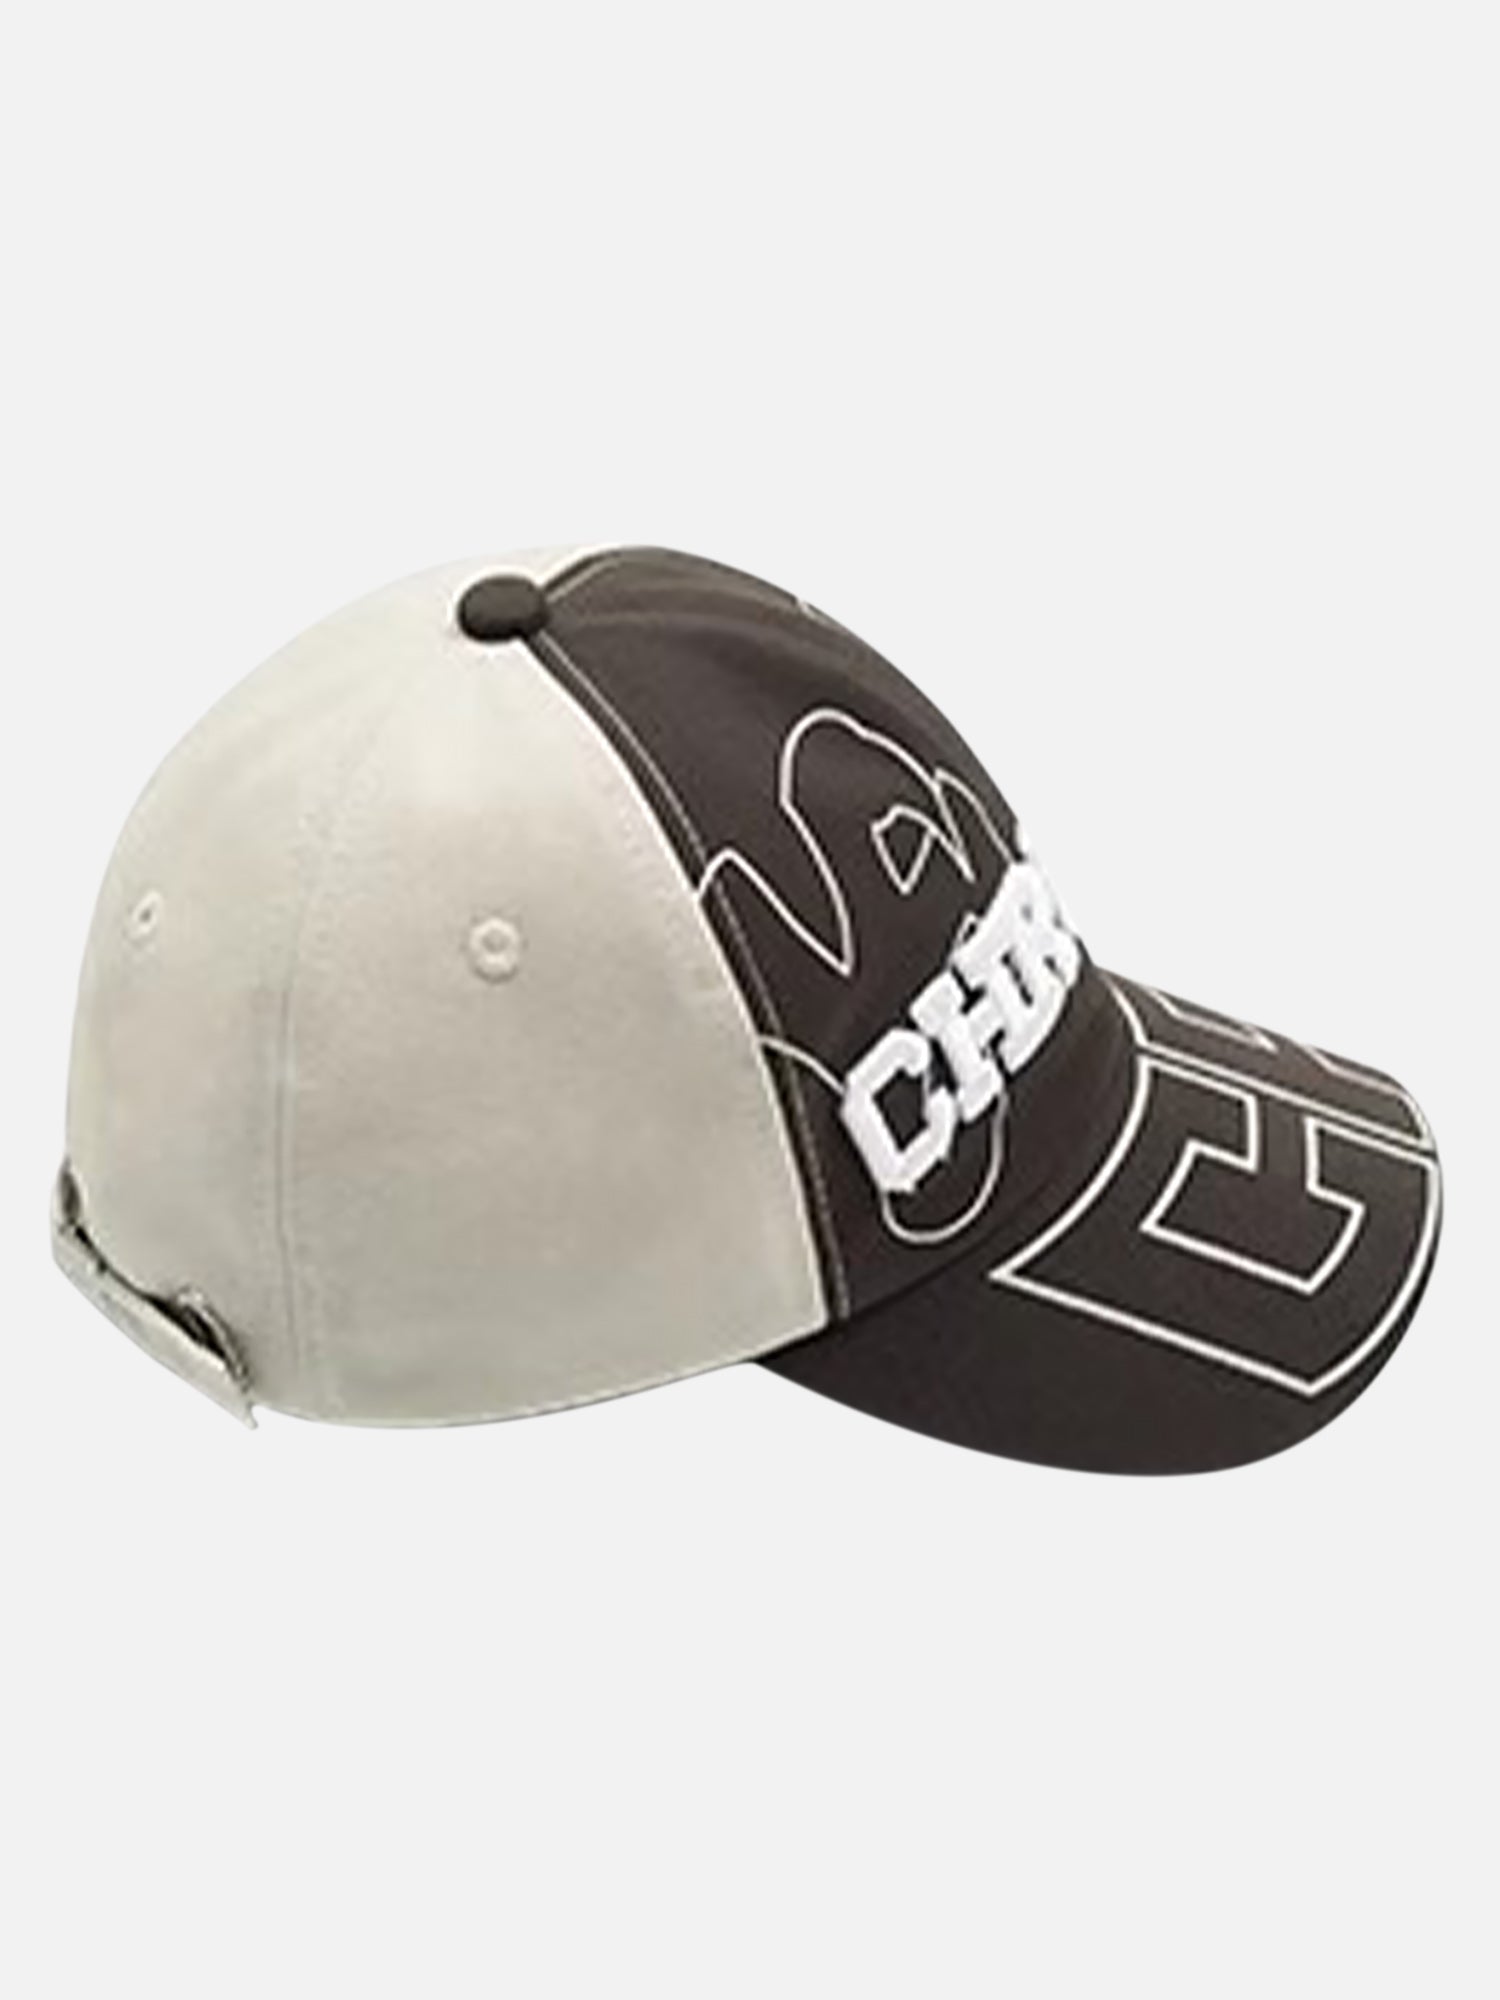 American Style Embroidered Printed Contrasting Peaked Cap